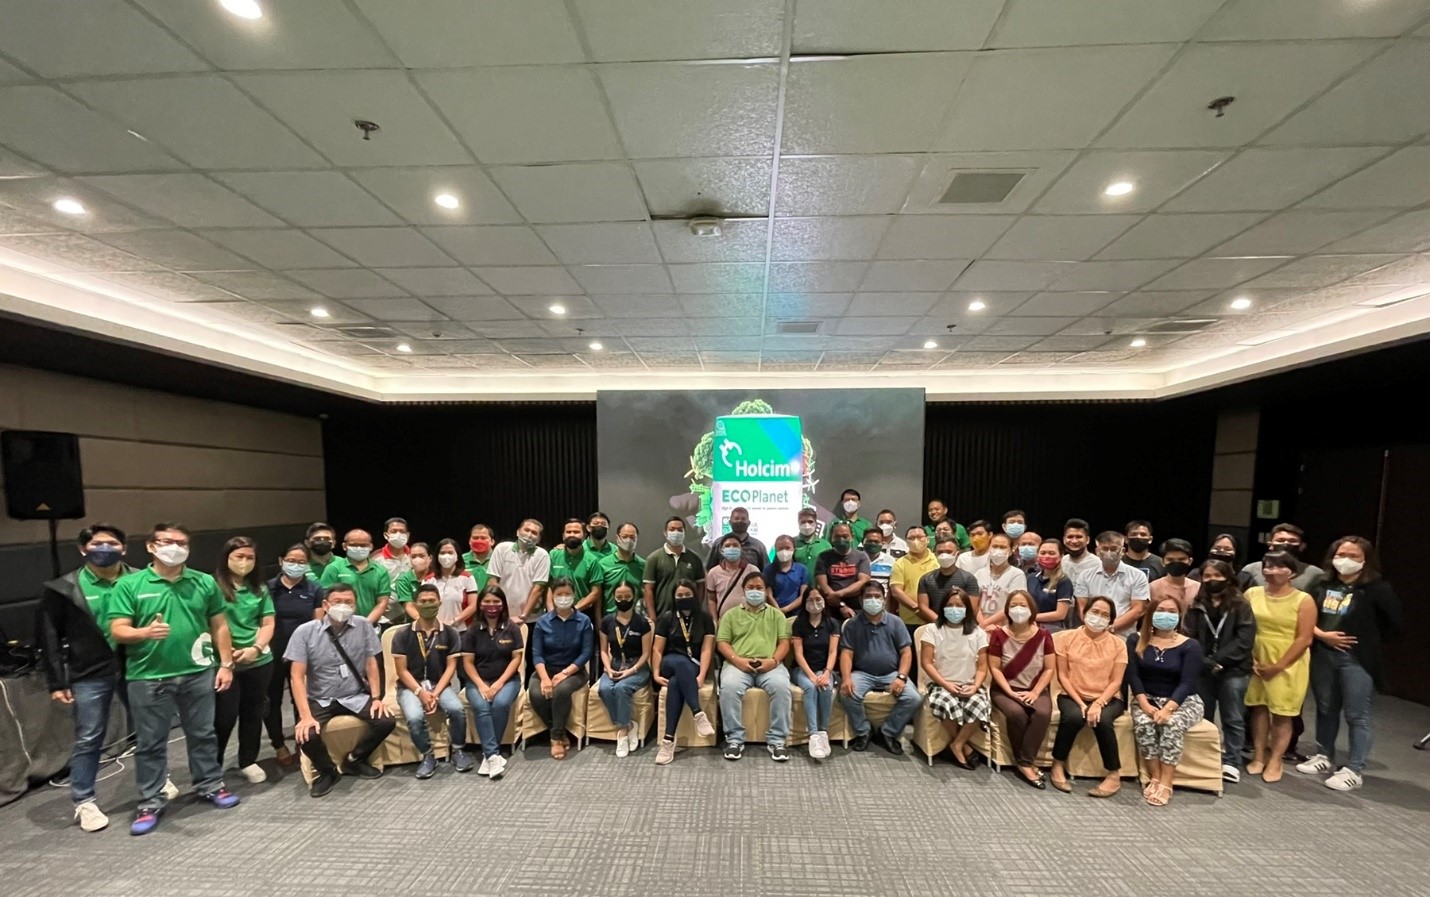 Holcim Philippines gathered a number of its customers in SM Lanang in Davao to launch its most environment-friendly blended cement ECOPlanet on July 29